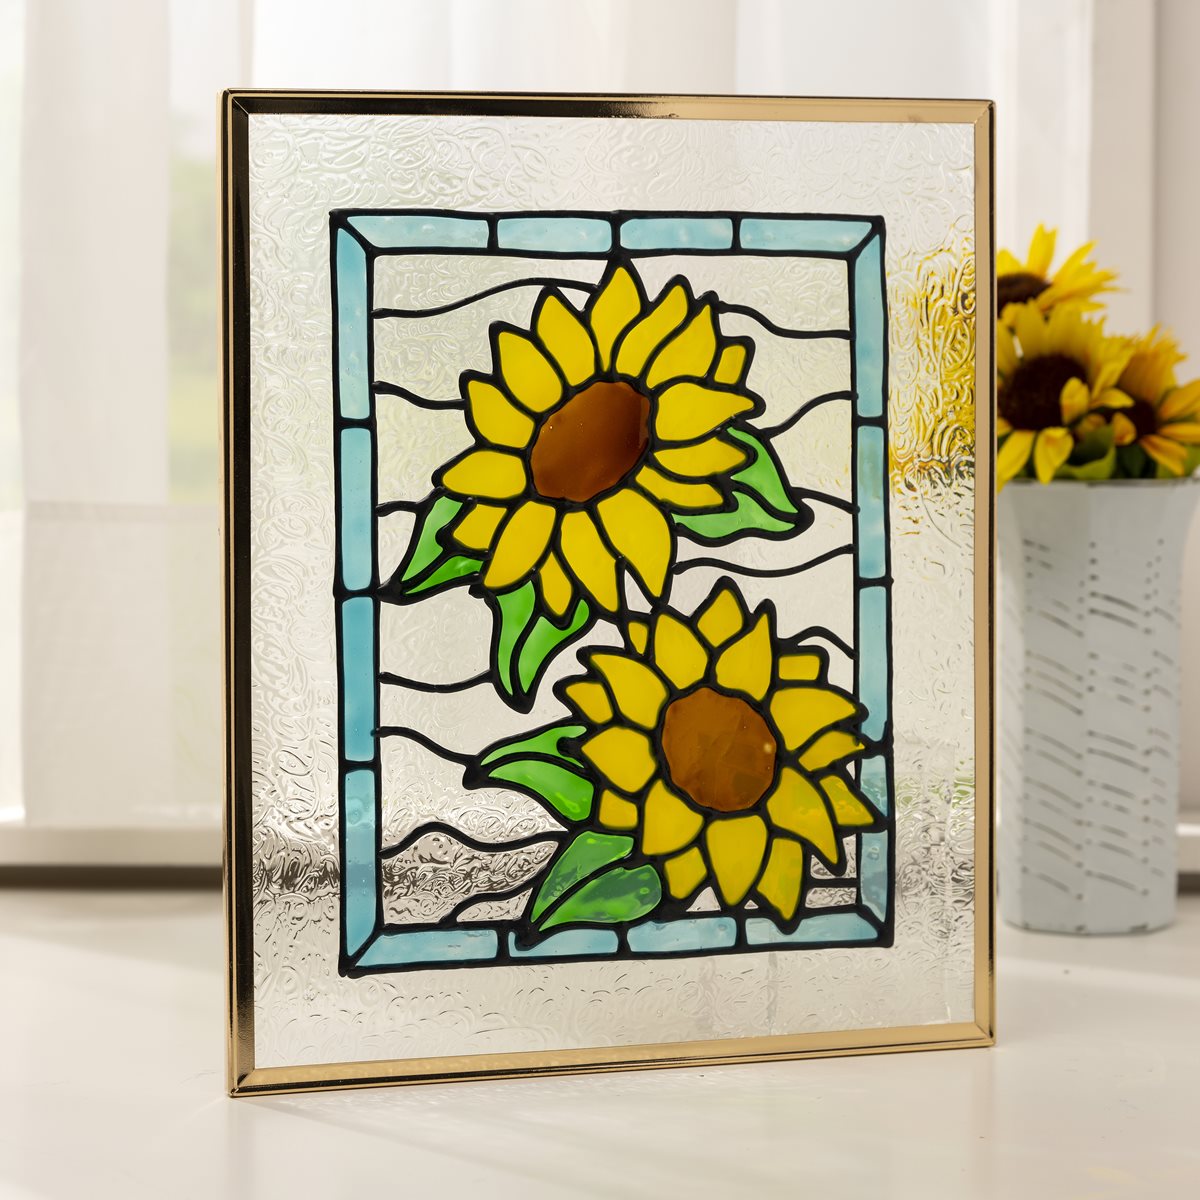 Floating Frame with Sunflowers in a Blue Border